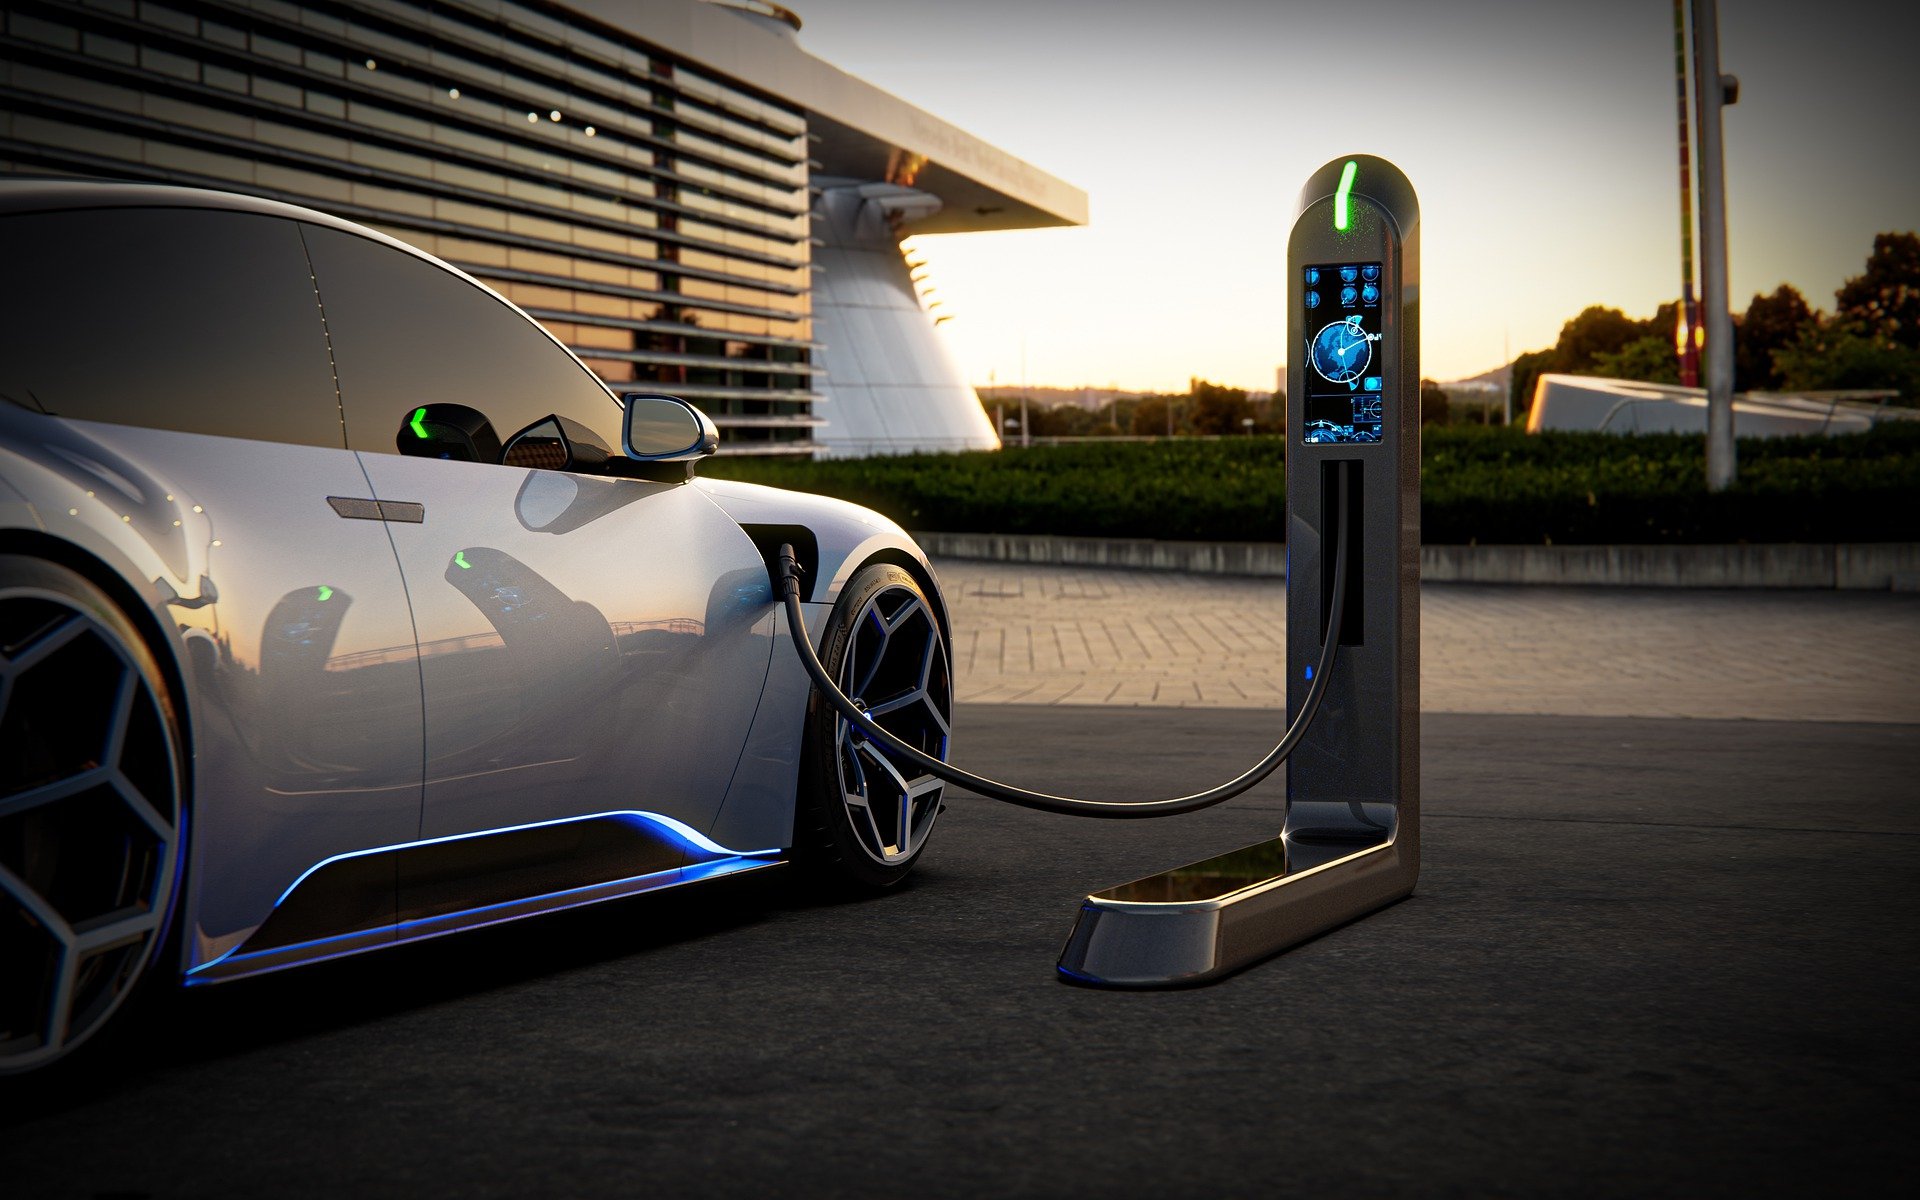 lectric vehicle charging solution North West